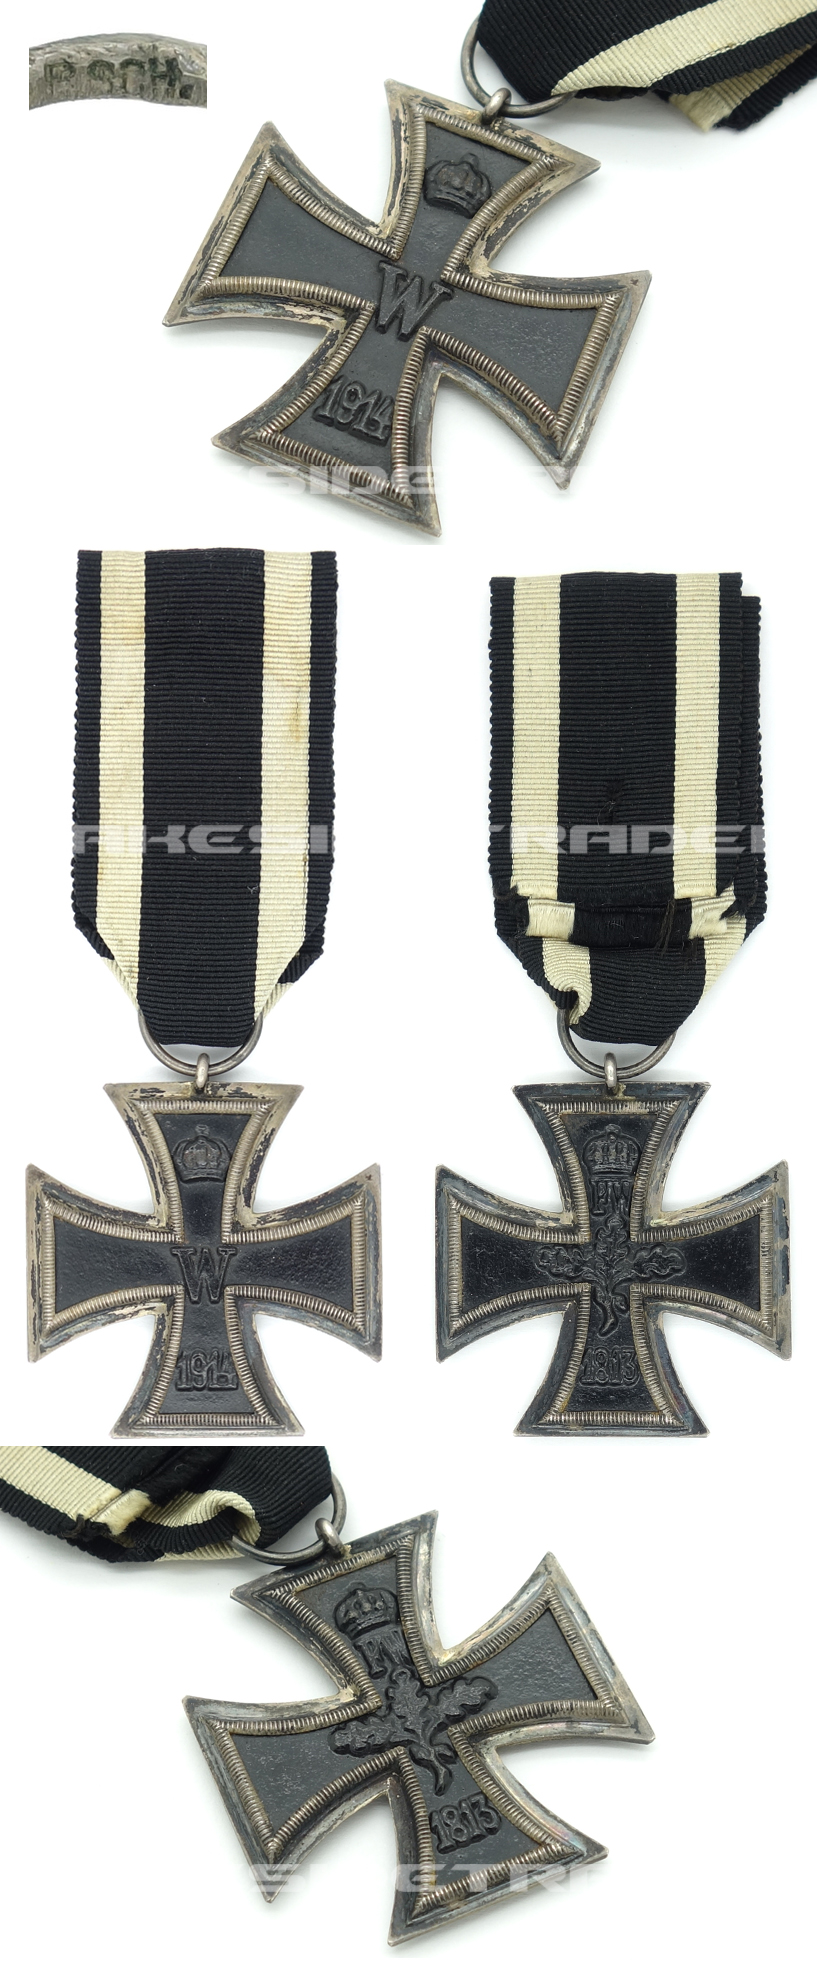 Imperial 2nd Class Iron Cross by R. Sch.